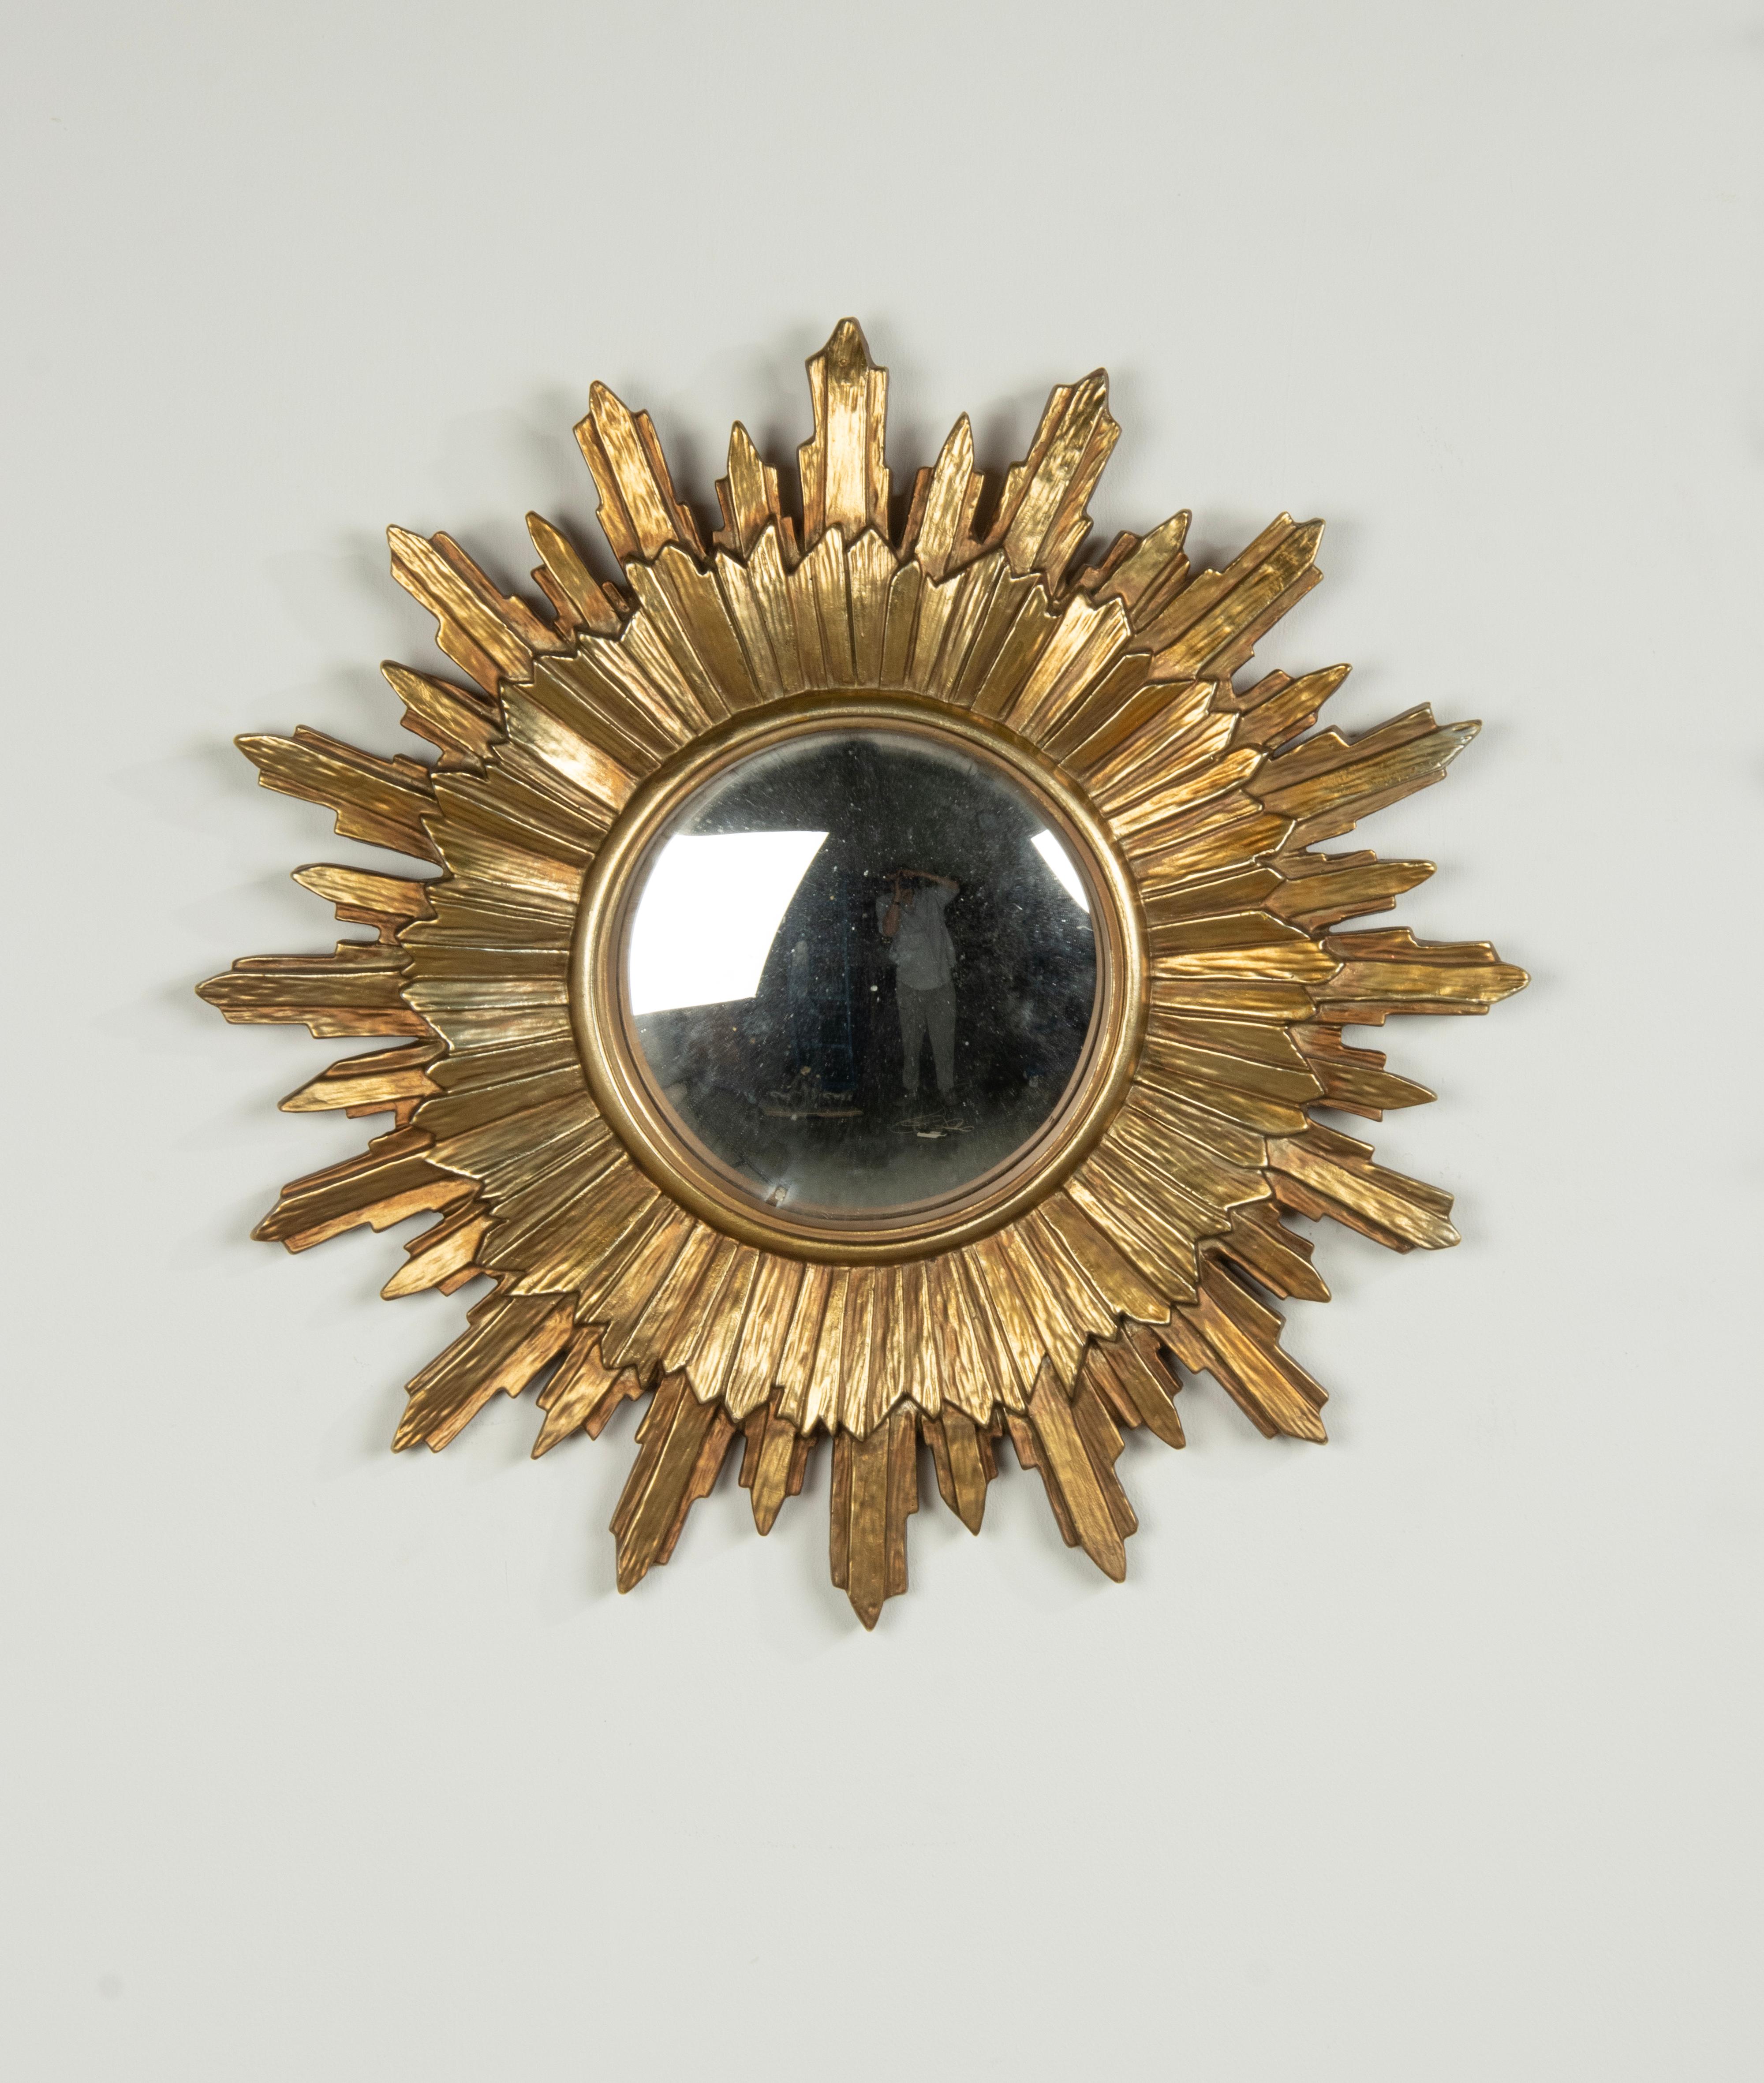 A beautiful mid century modern sunburst mirror. Made of epoxy resin, beautifully gold patinated. 
The mirror is Ø59 cm, the mirror glass is Ø20 cm. 
The mirror is in good condition. 
Free shipping.